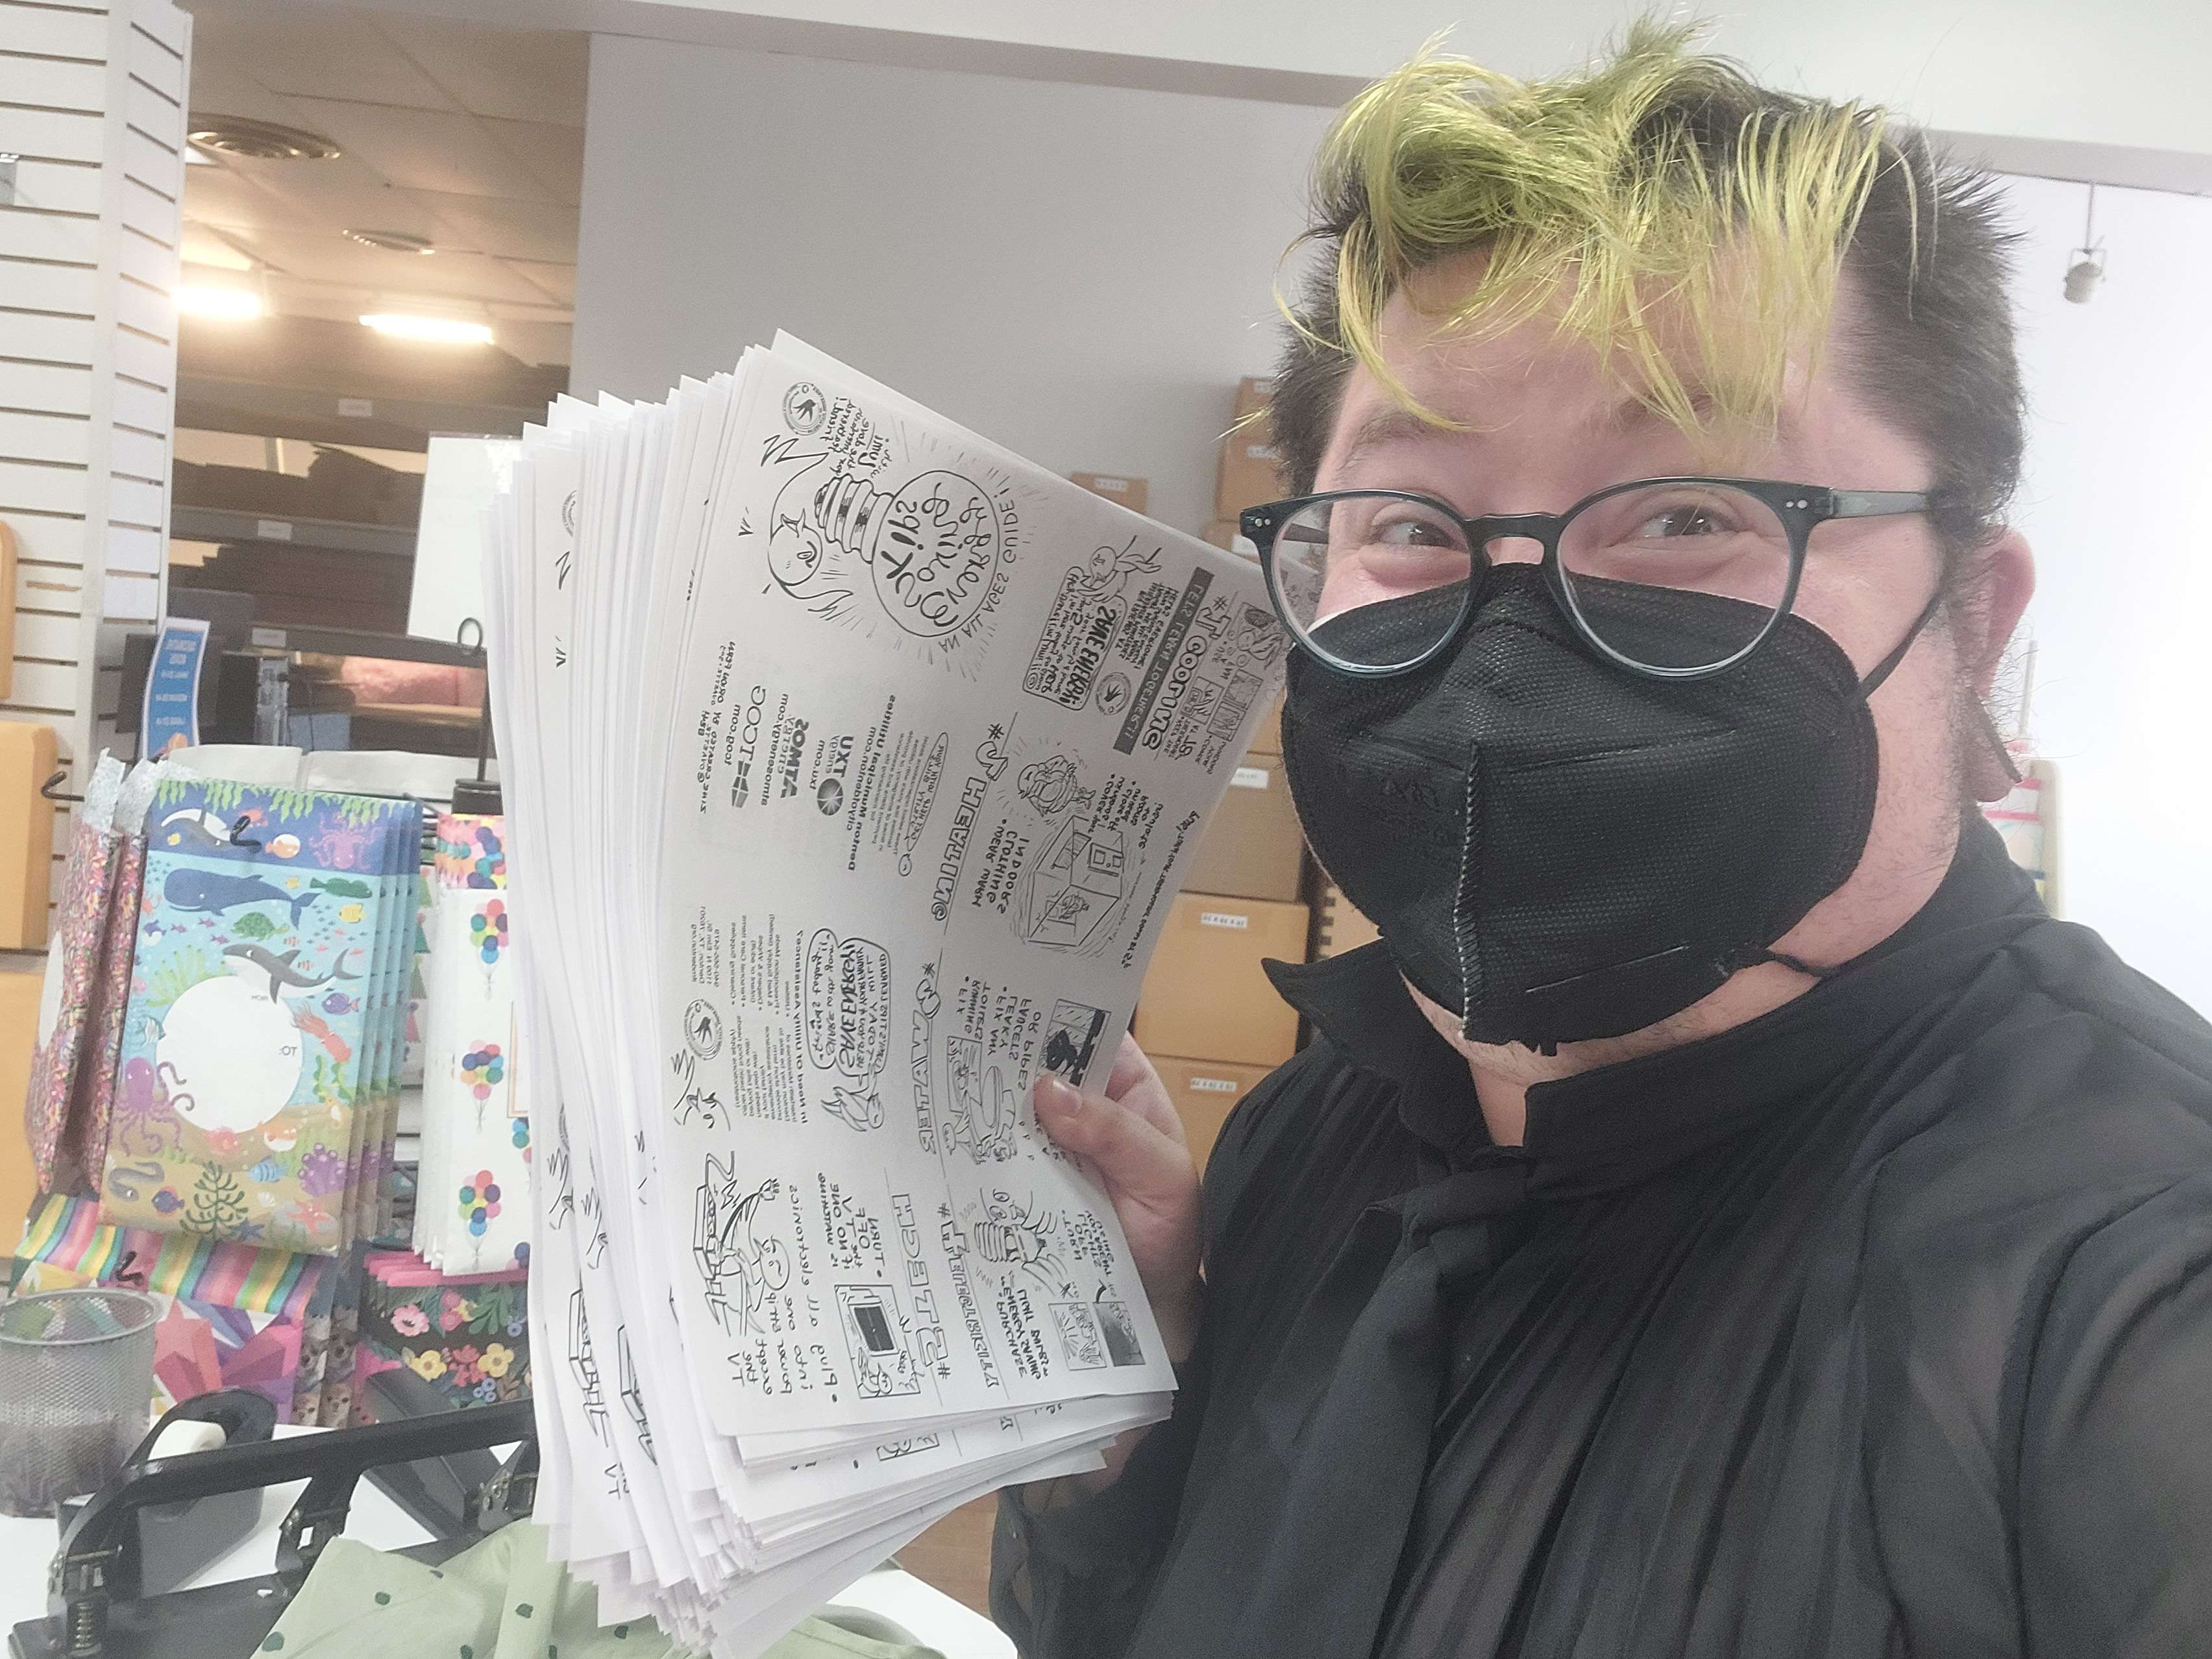 Me holding 250 zines for Interfaith Minstries of Denton, it is a thick stack of paper. I am a white trans man wearing glasses and a black N95 respirator mask. I am also wearing a black button up sheer shirt. I am in a print shop. I am smiling from under my mask.